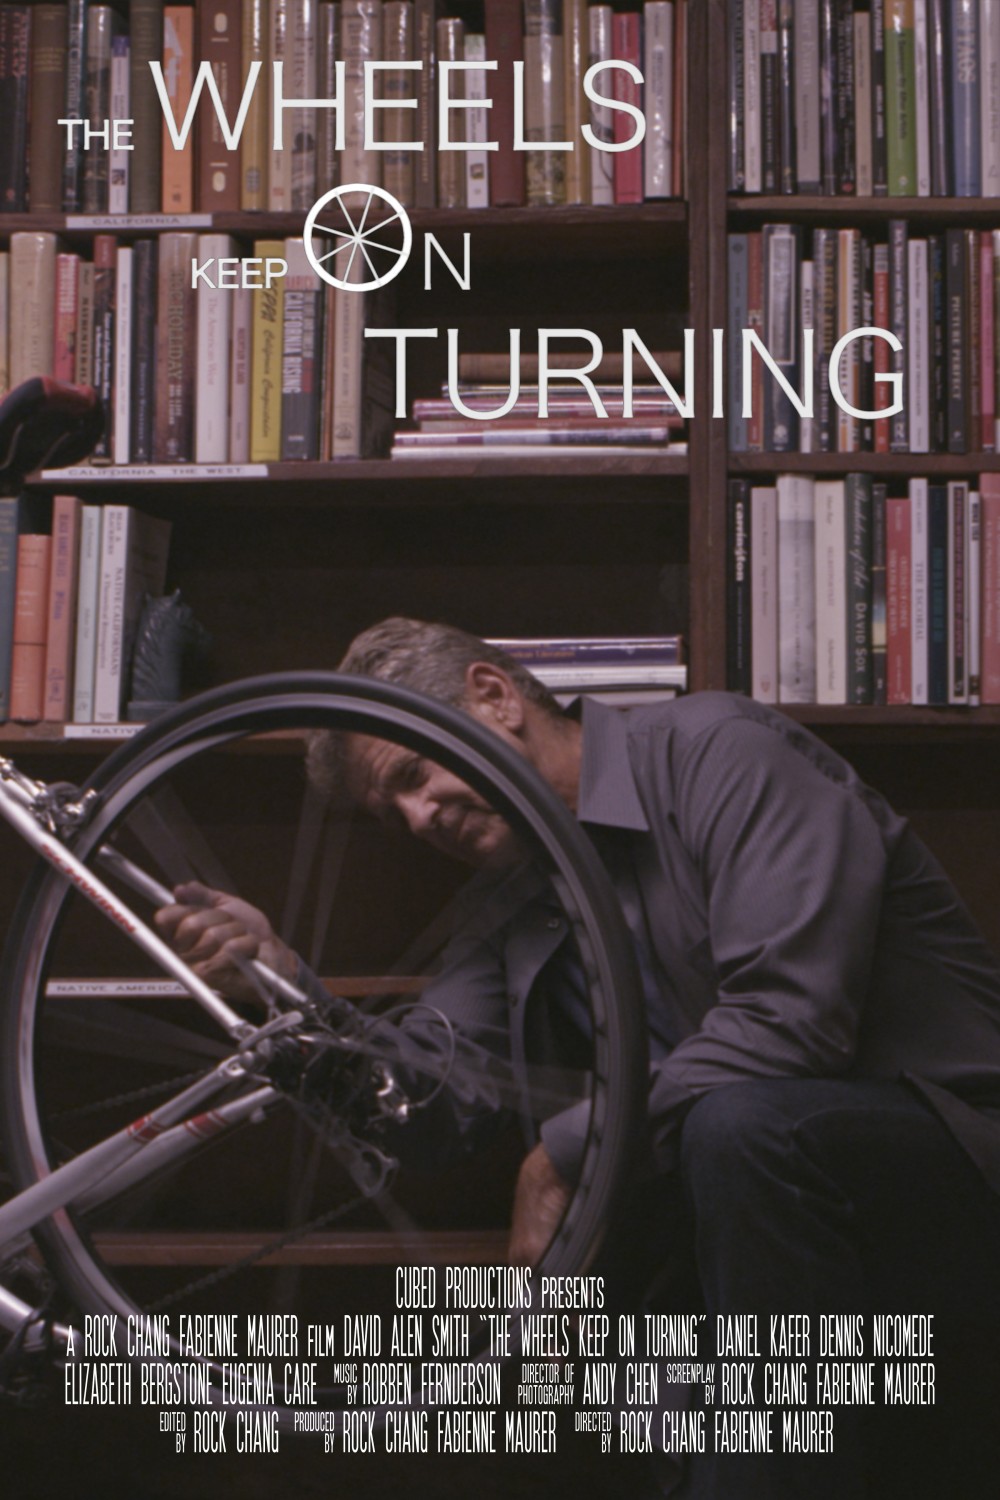 Extra Large Movie Poster Image for The Wheels Keep on Turning